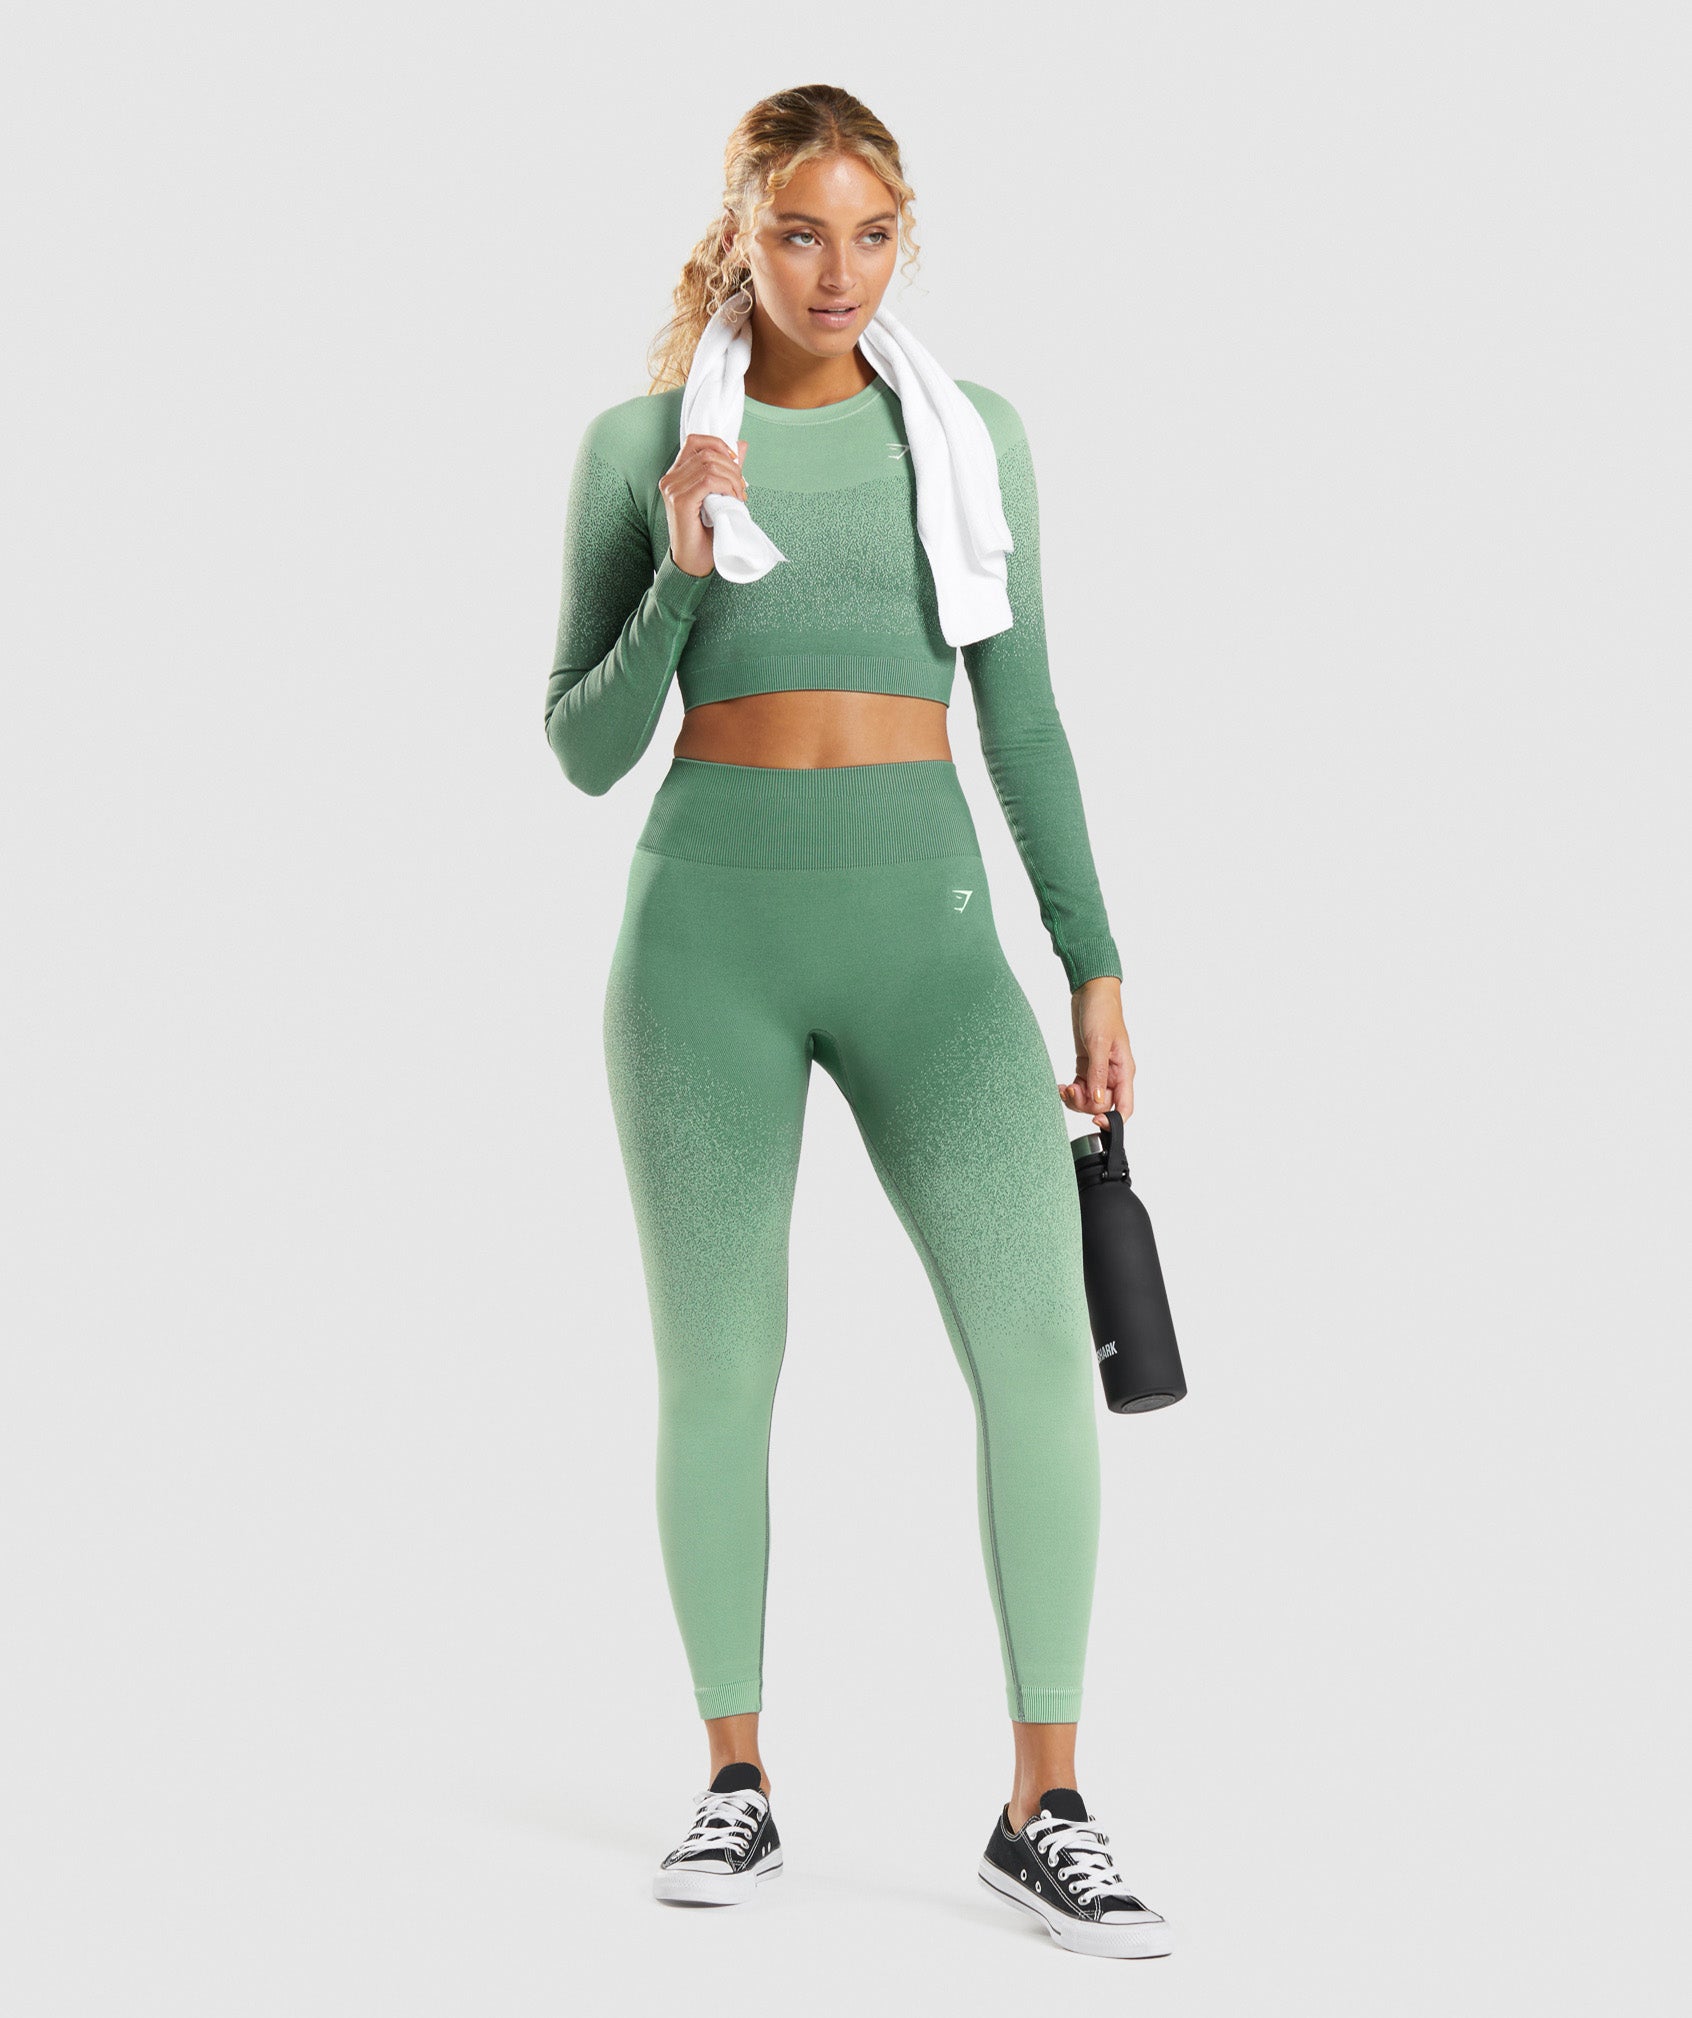 Gymshark Adapt Green White Ombre Seamless Leggings Size: L Active Yoga Gym